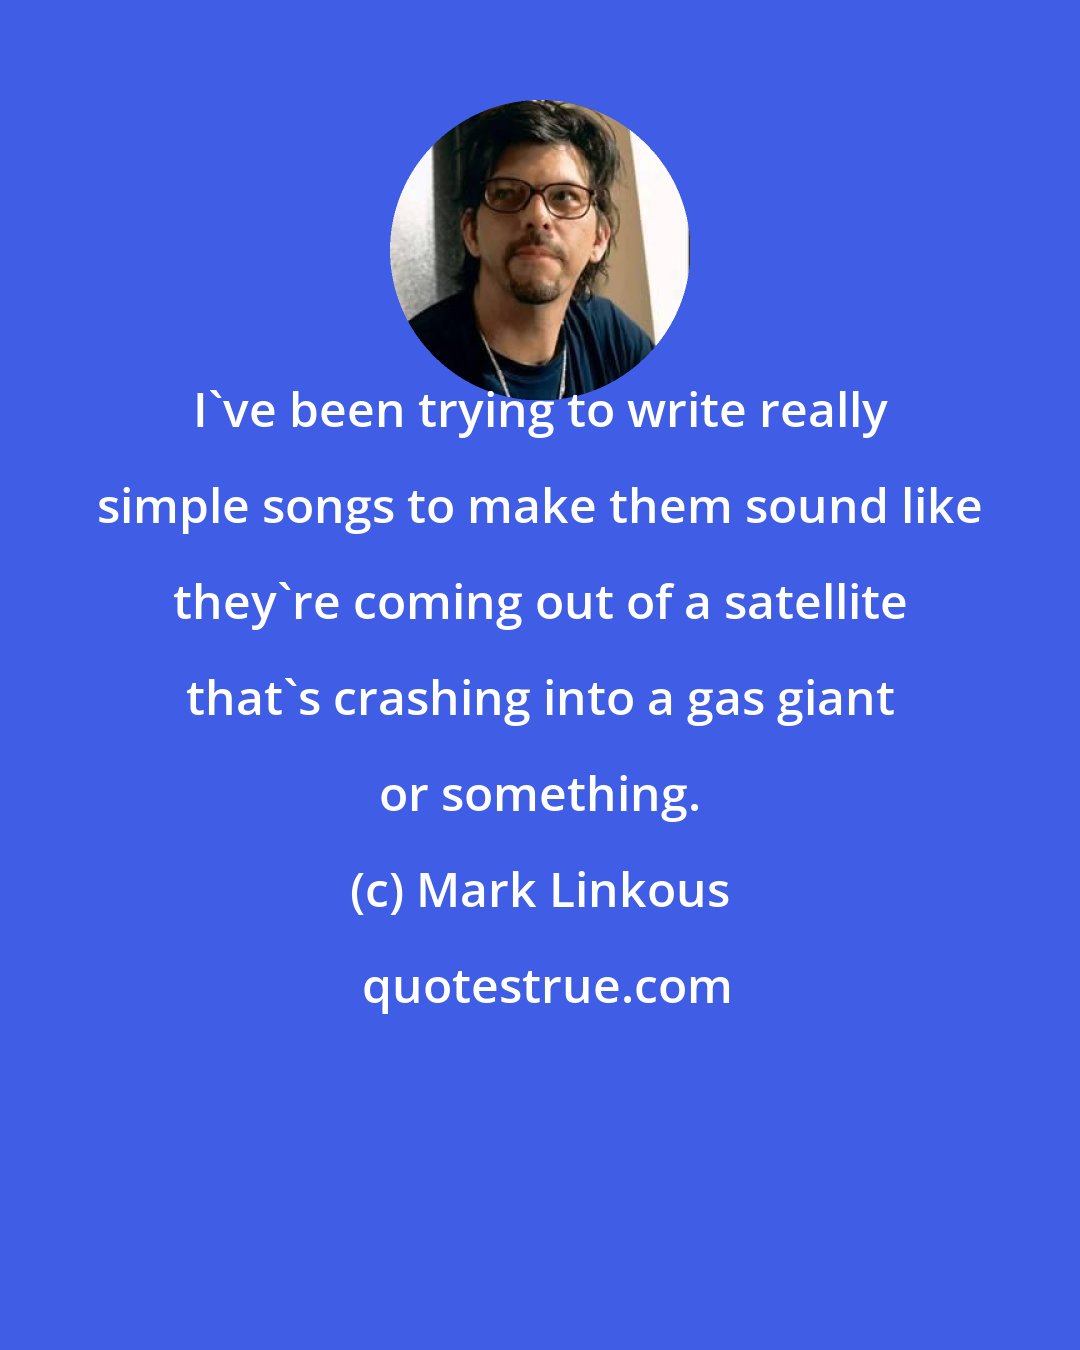 Mark Linkous: I've been trying to write really simple songs to make them sound like they're coming out of a satellite that's crashing into a gas giant or something.